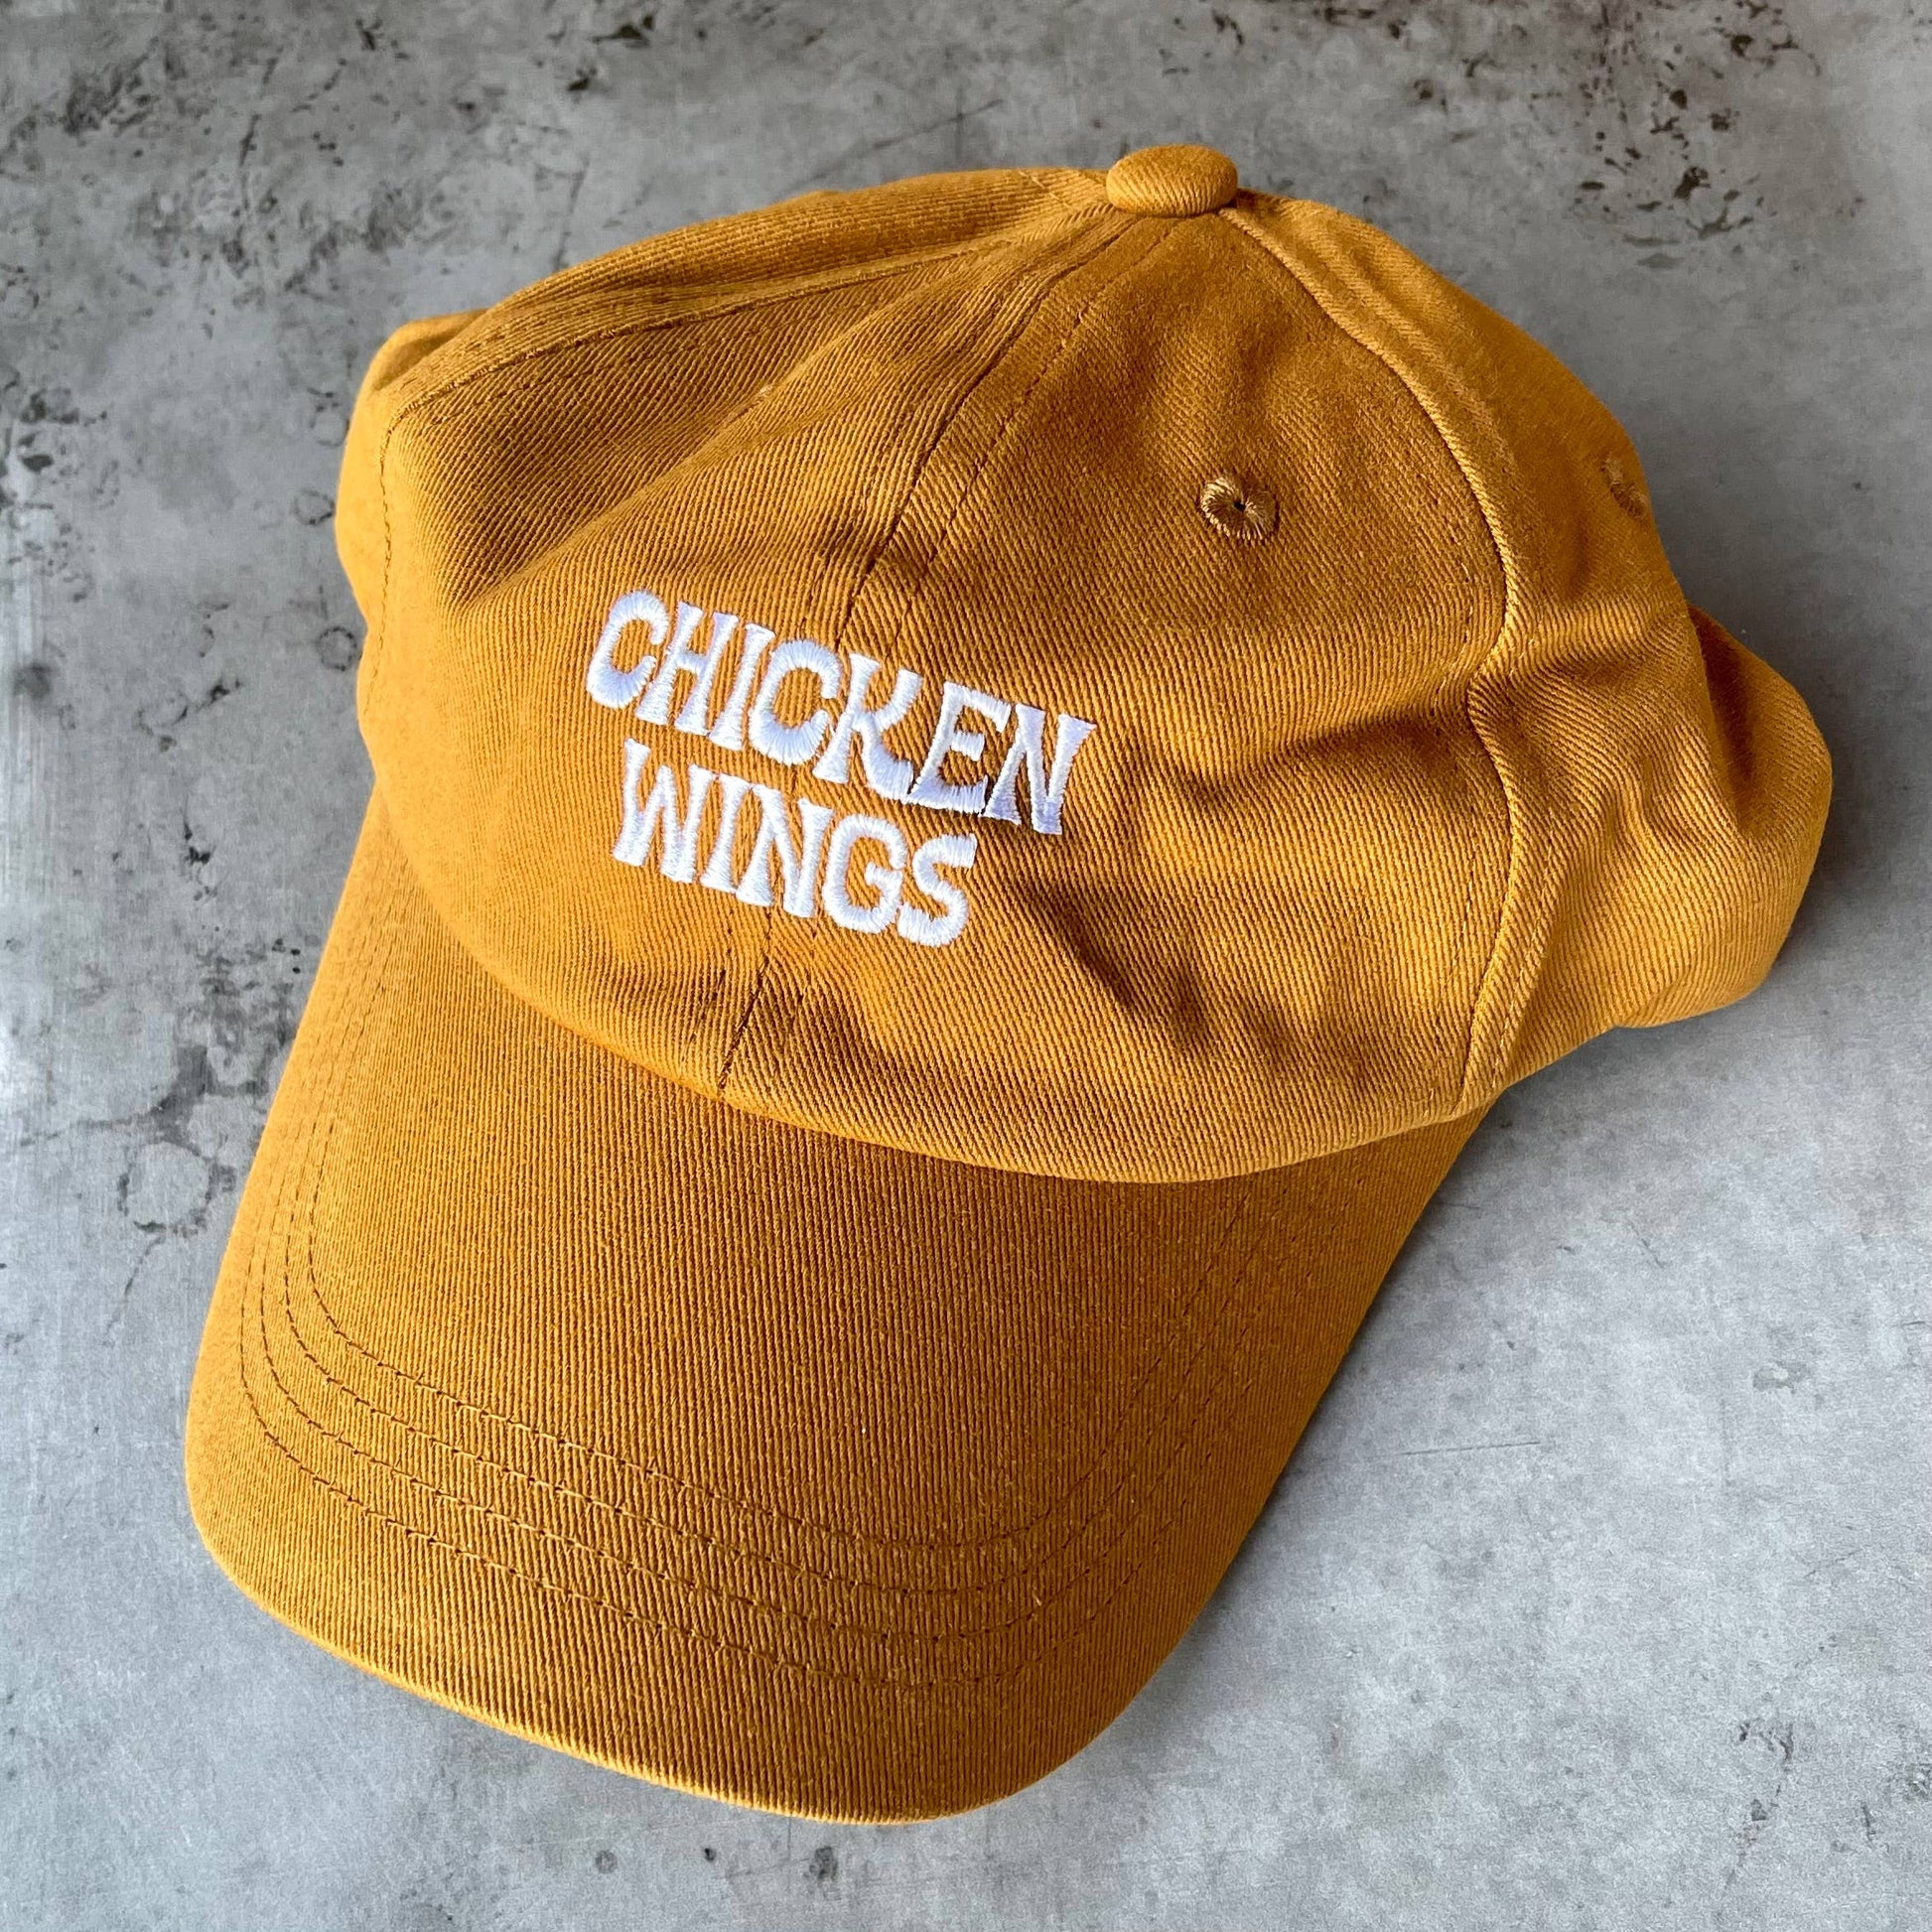 Front of baseball cap -- embroidered text that reads "chicken wings" 